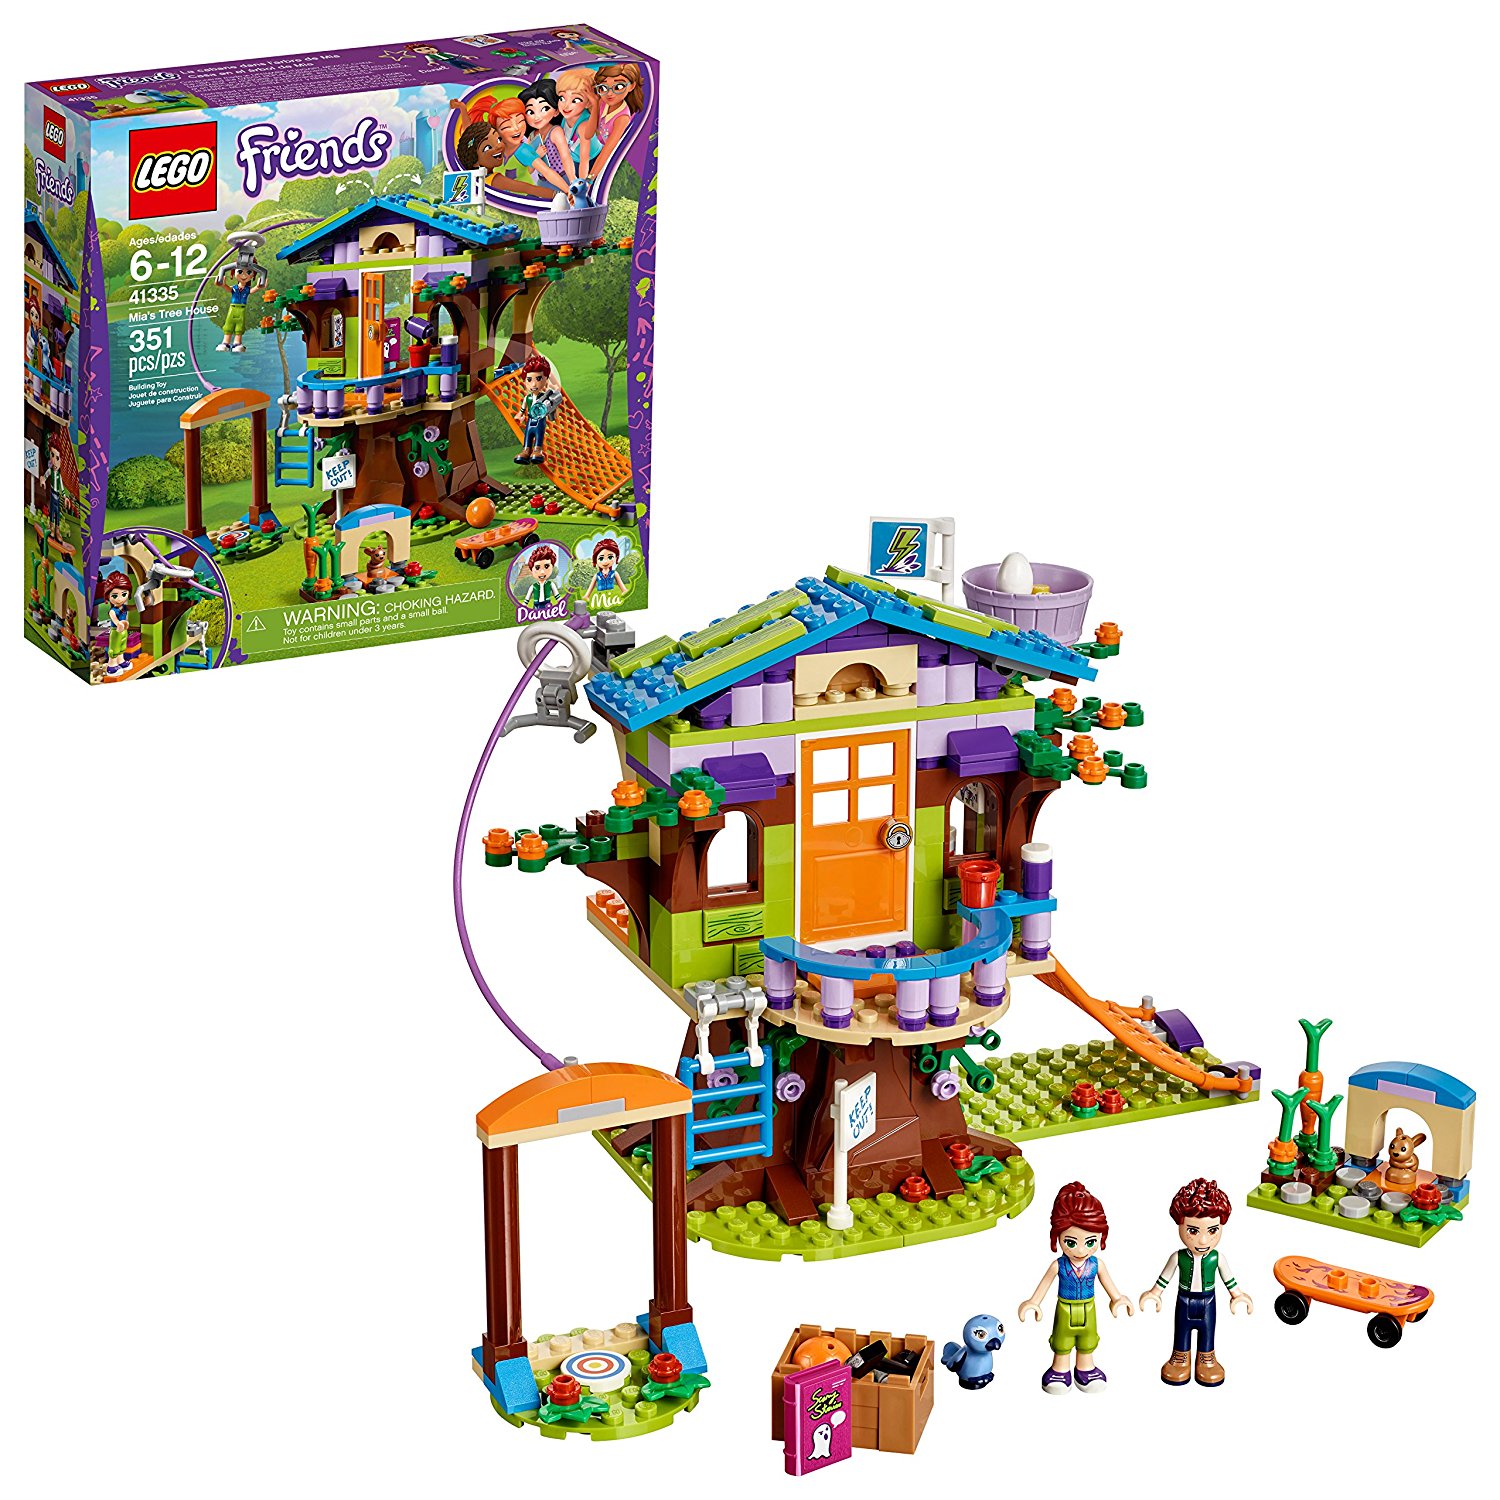 LEGO Friends Mia's Tree House Building Set for $23.99 ...